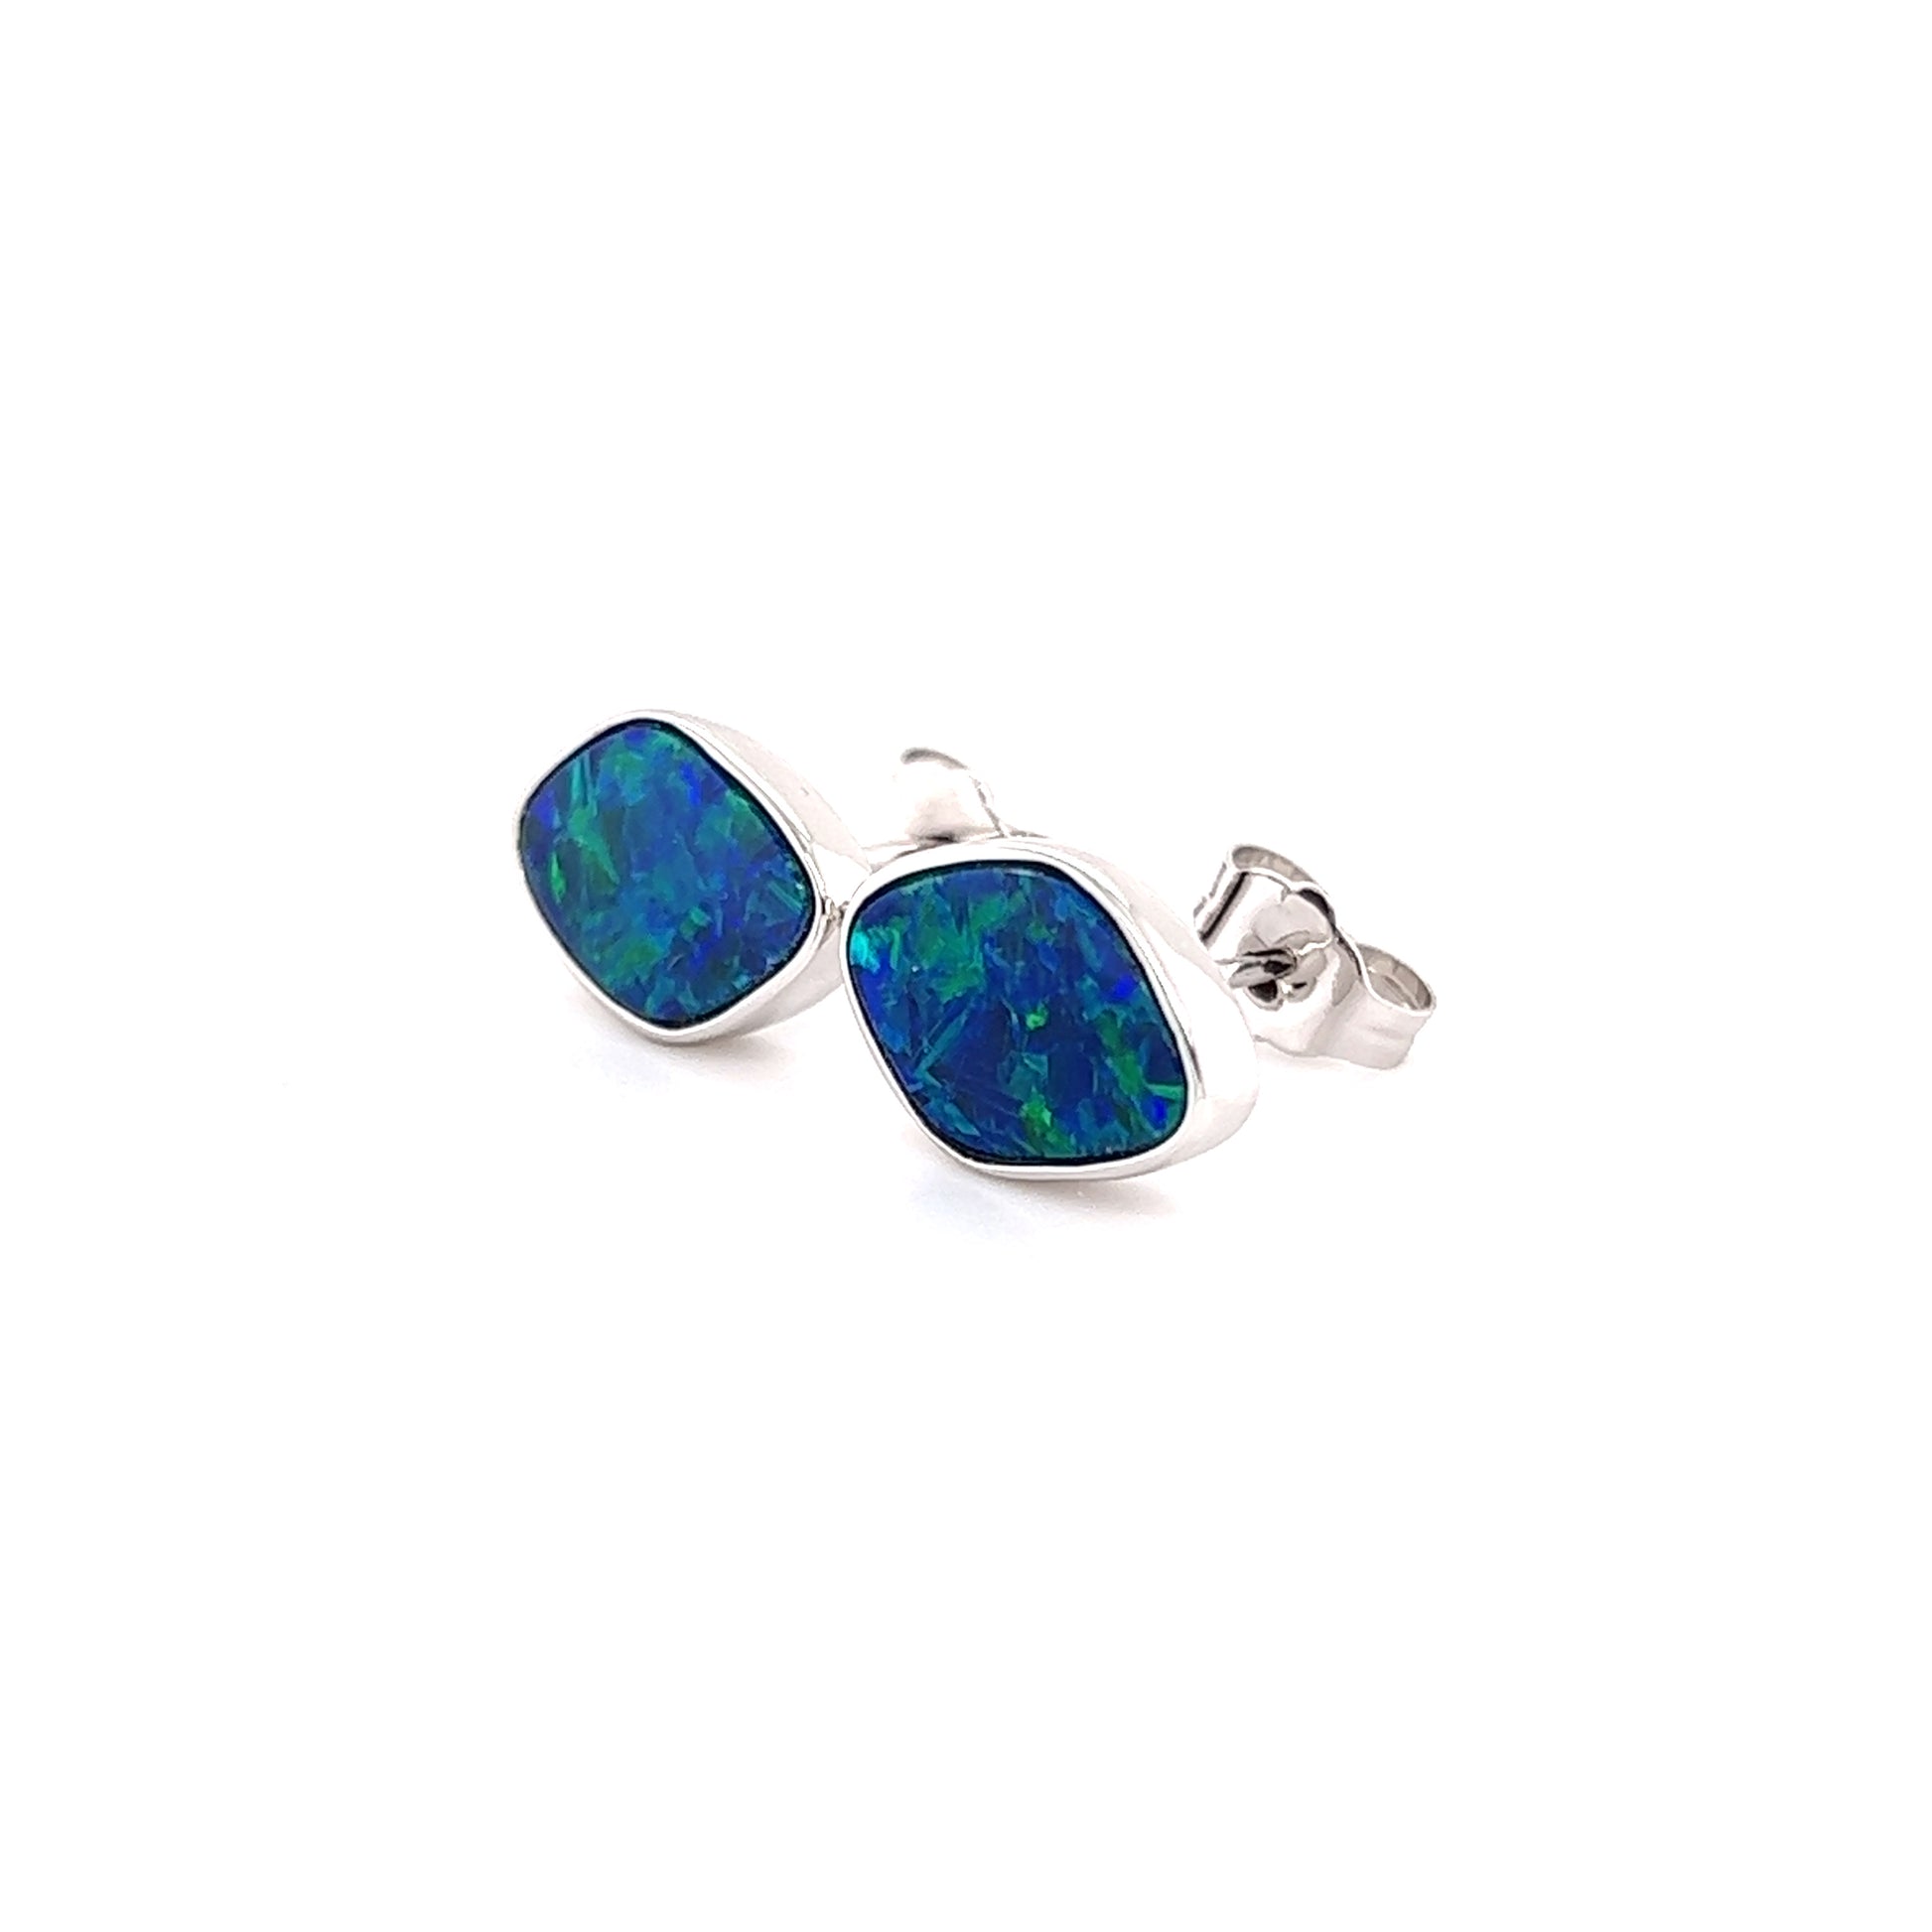 Black Opal Stud Earrings with 2.79ctw of Opal in 14K White Gold Right Side View